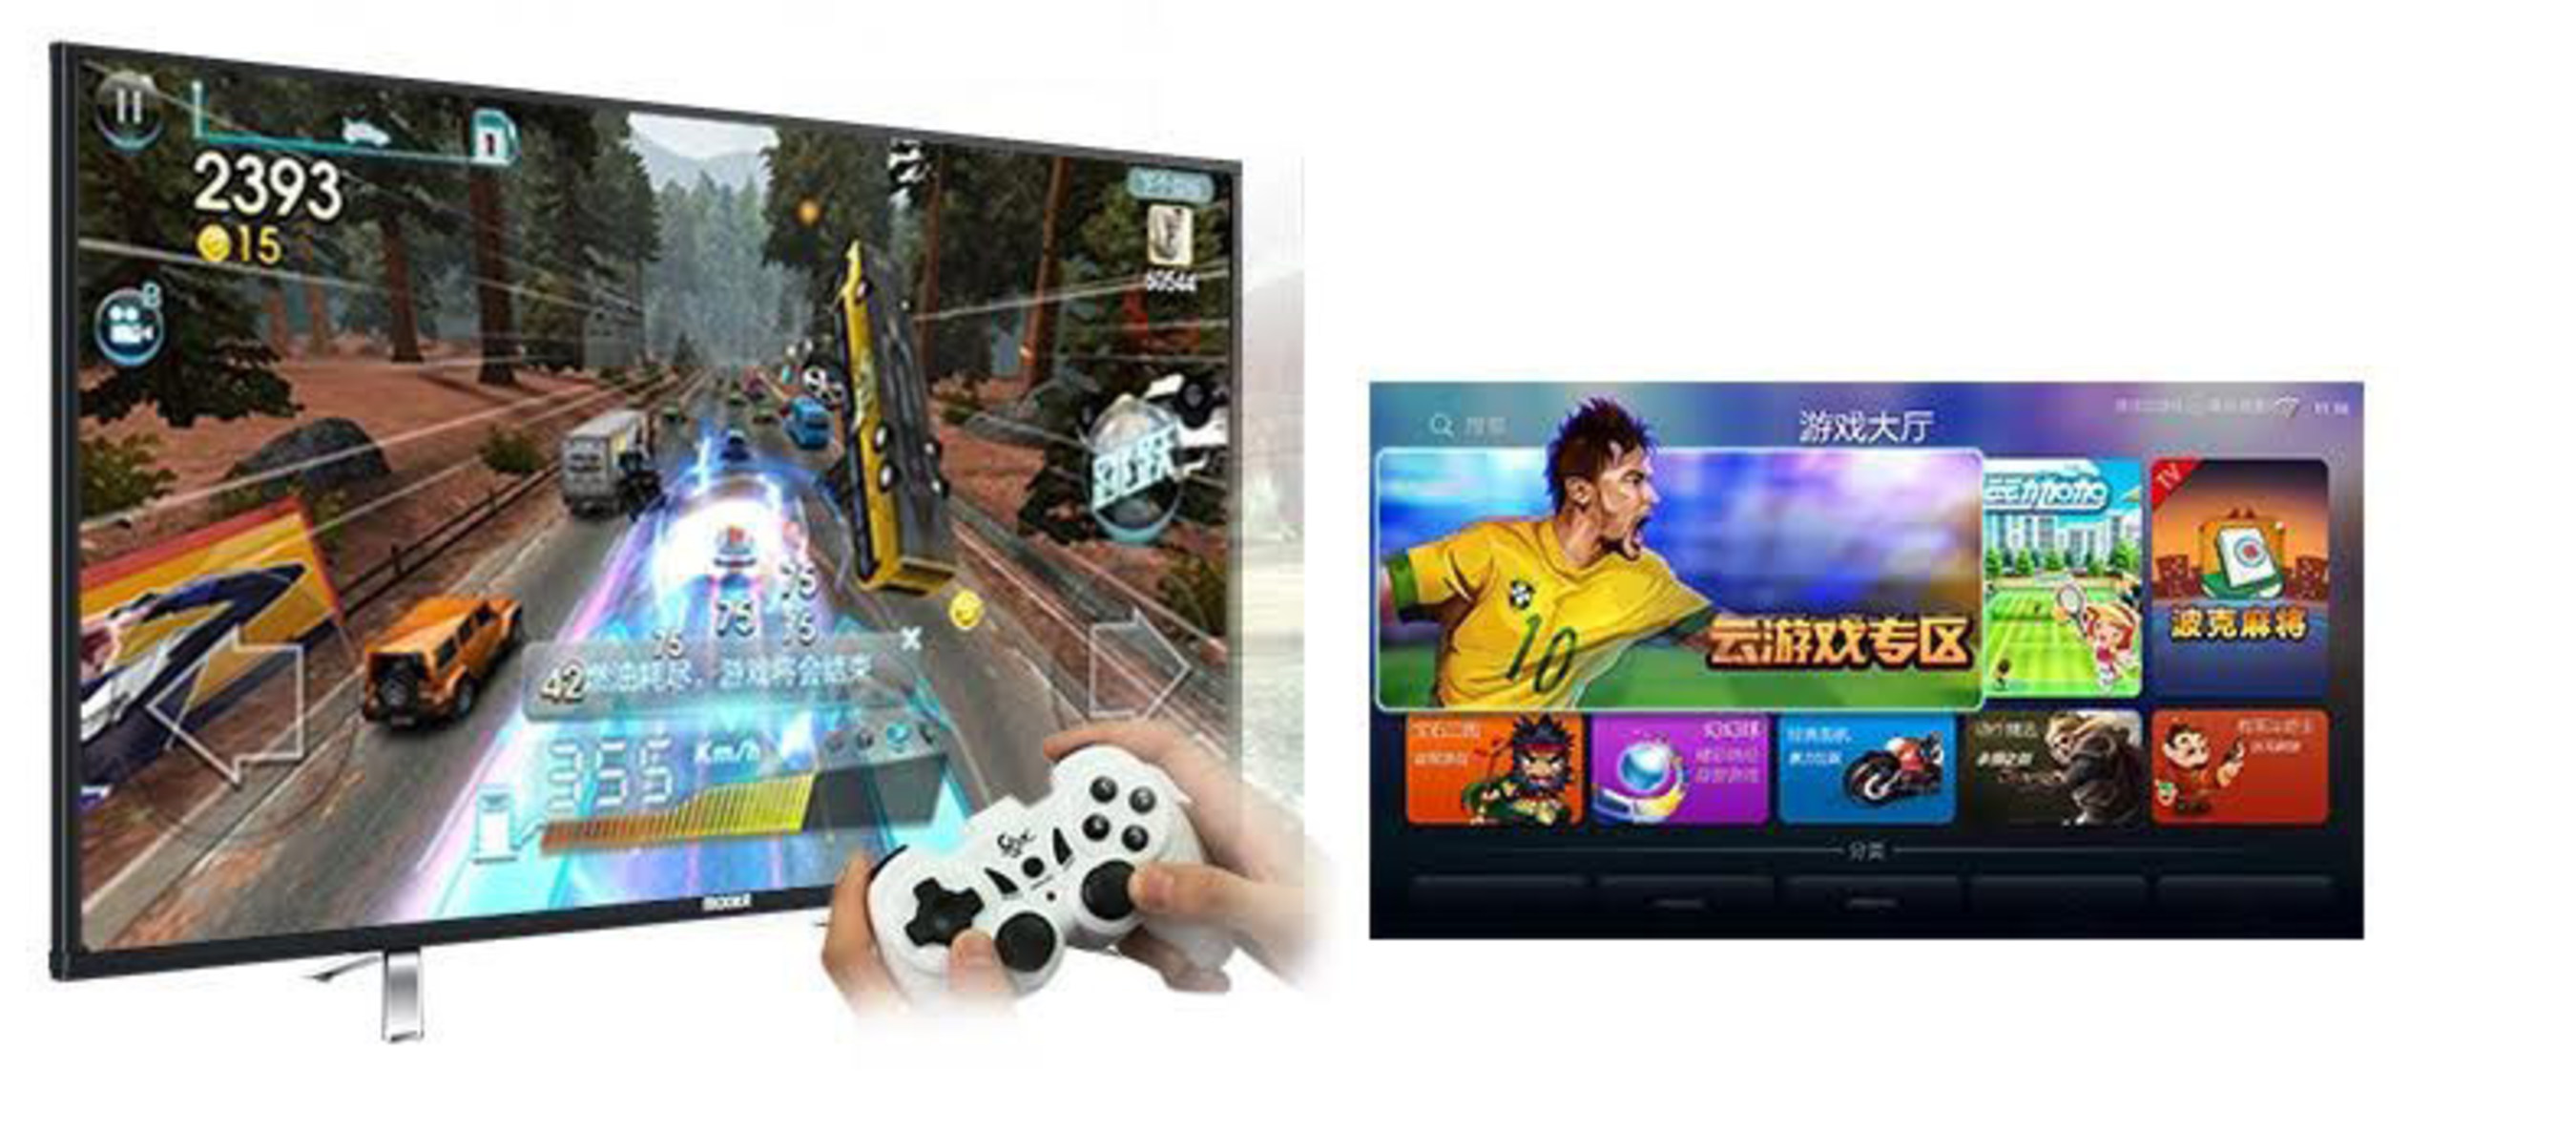 Haier Connected TV built-in Cloud Gaming Service